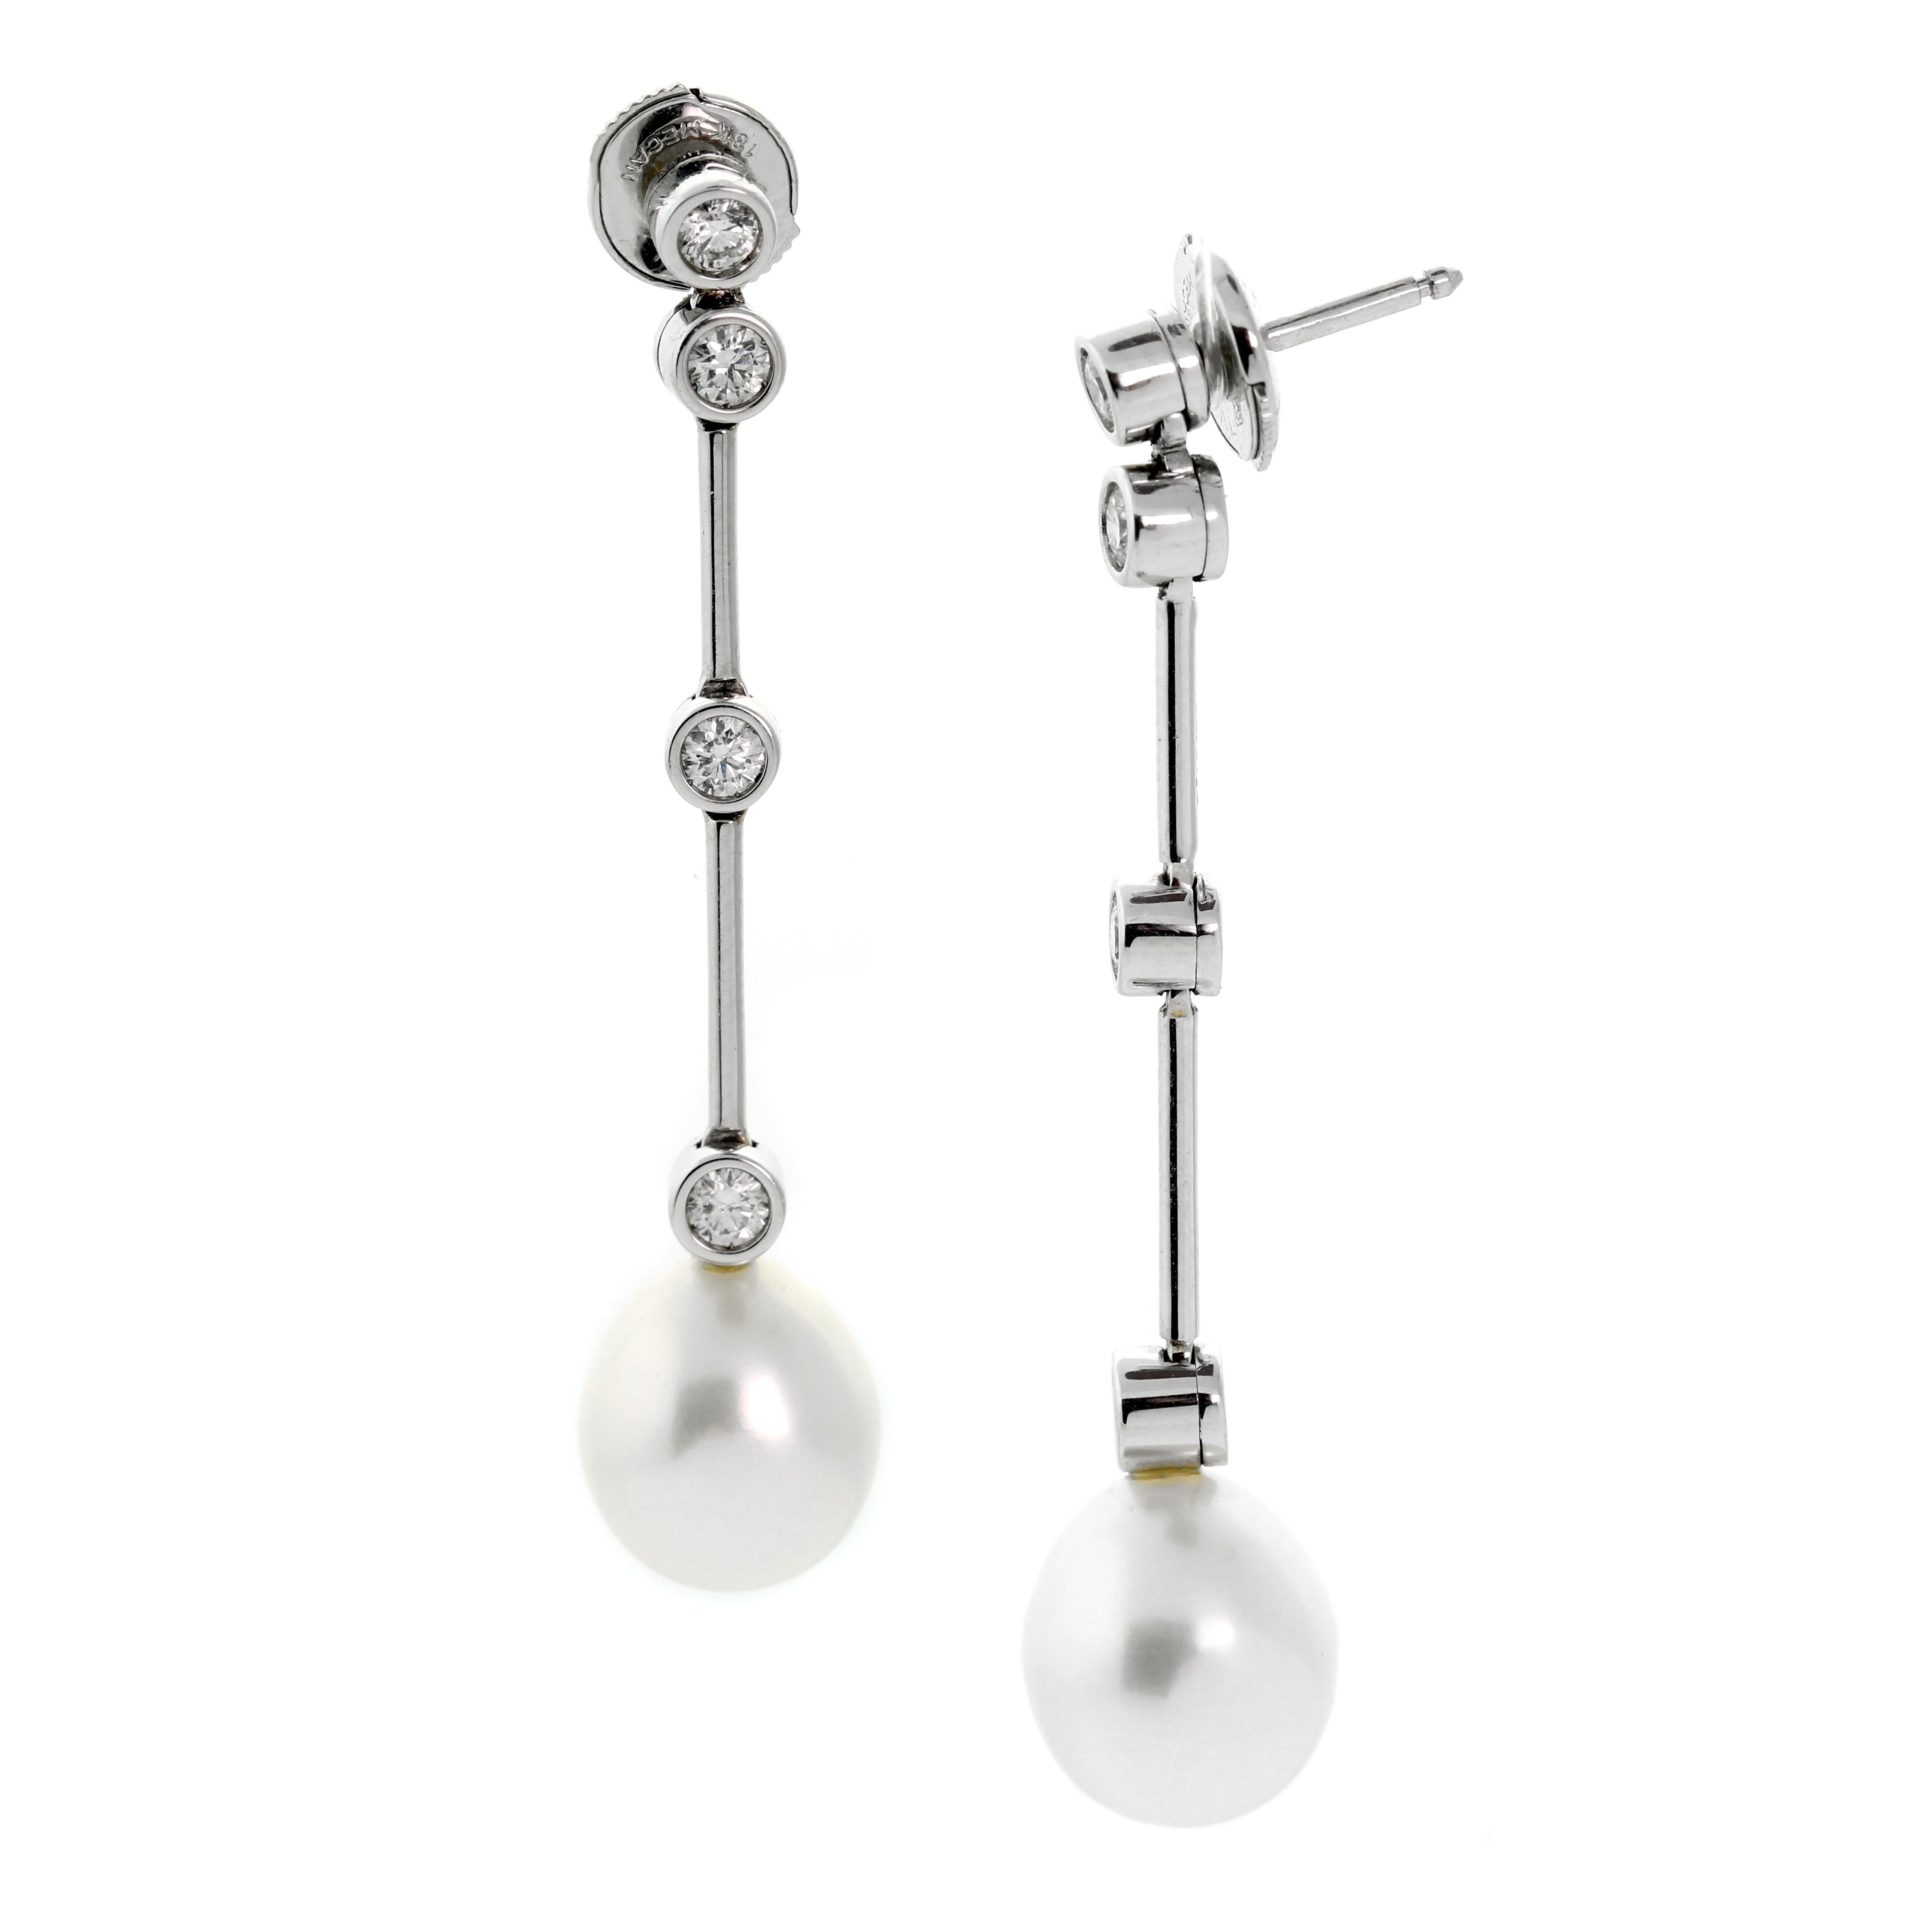 A fabulous pair of Chanel white gold drop earrings, 1.92 inches long, accented by the finest Chanel round brilliant cut diamonds set in 18k white gold. The earrings are fashioned in lengths of white gold that intermittently showcase a diamond, and